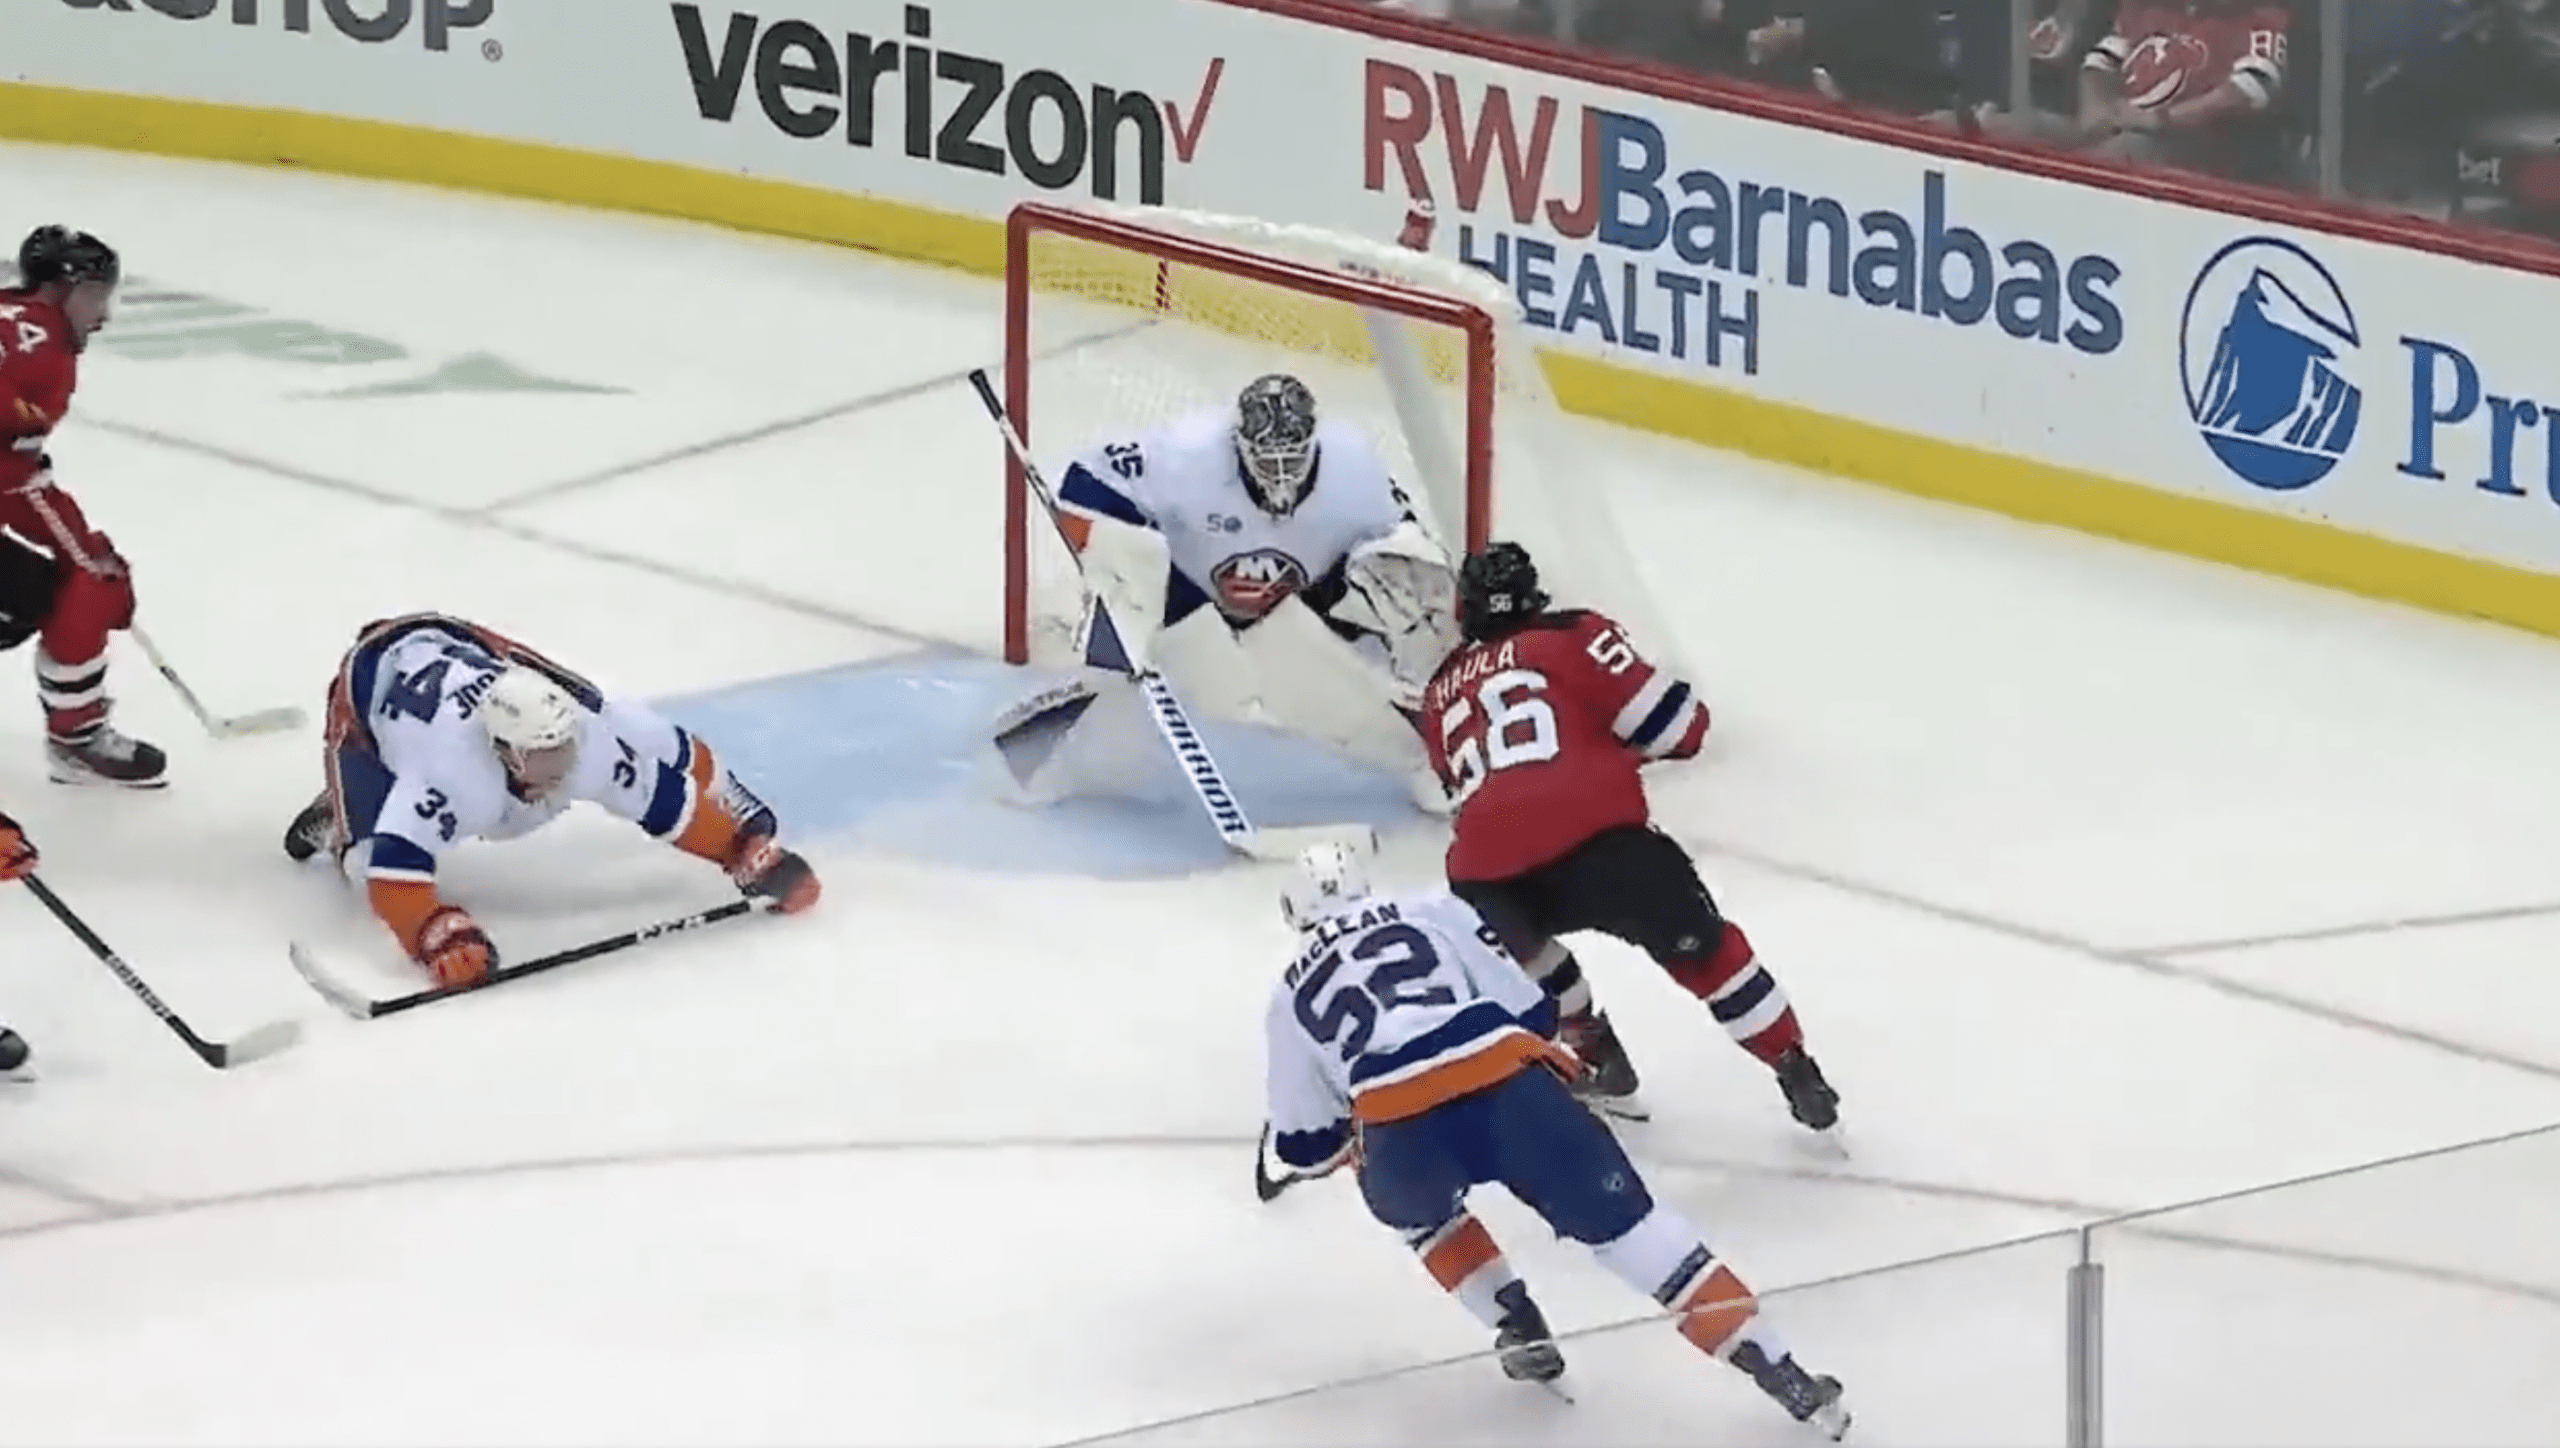 4 Takeaways From New Jersey Devils' 4-1 Loss to the Lightning